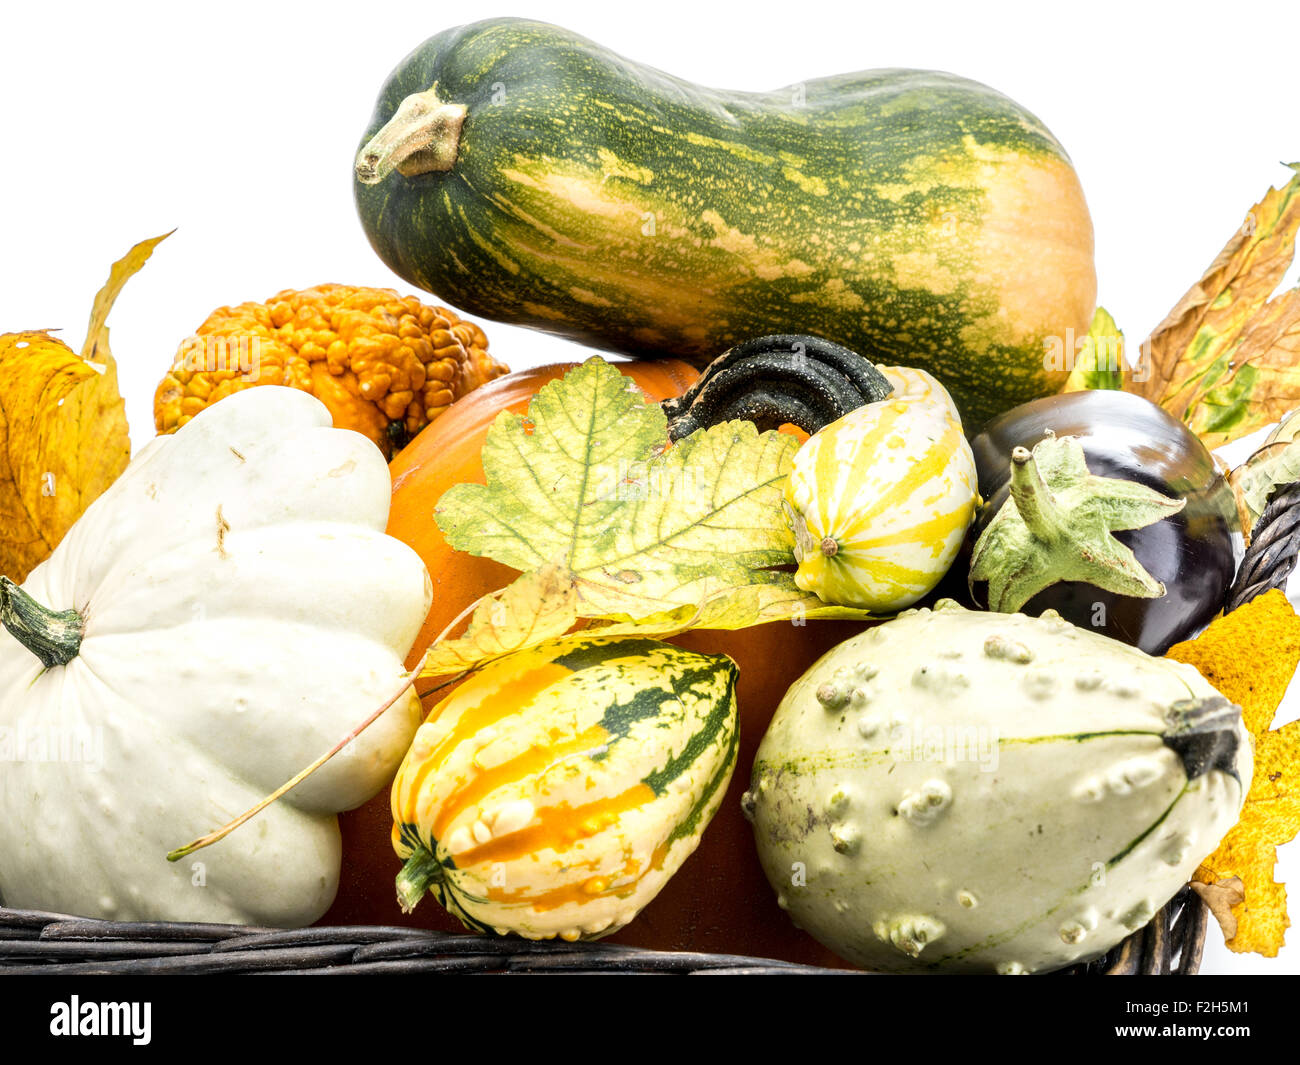 Composition of pumpkin, zucchini,summer squashes, and dead maple leaves on white background Stock Photo